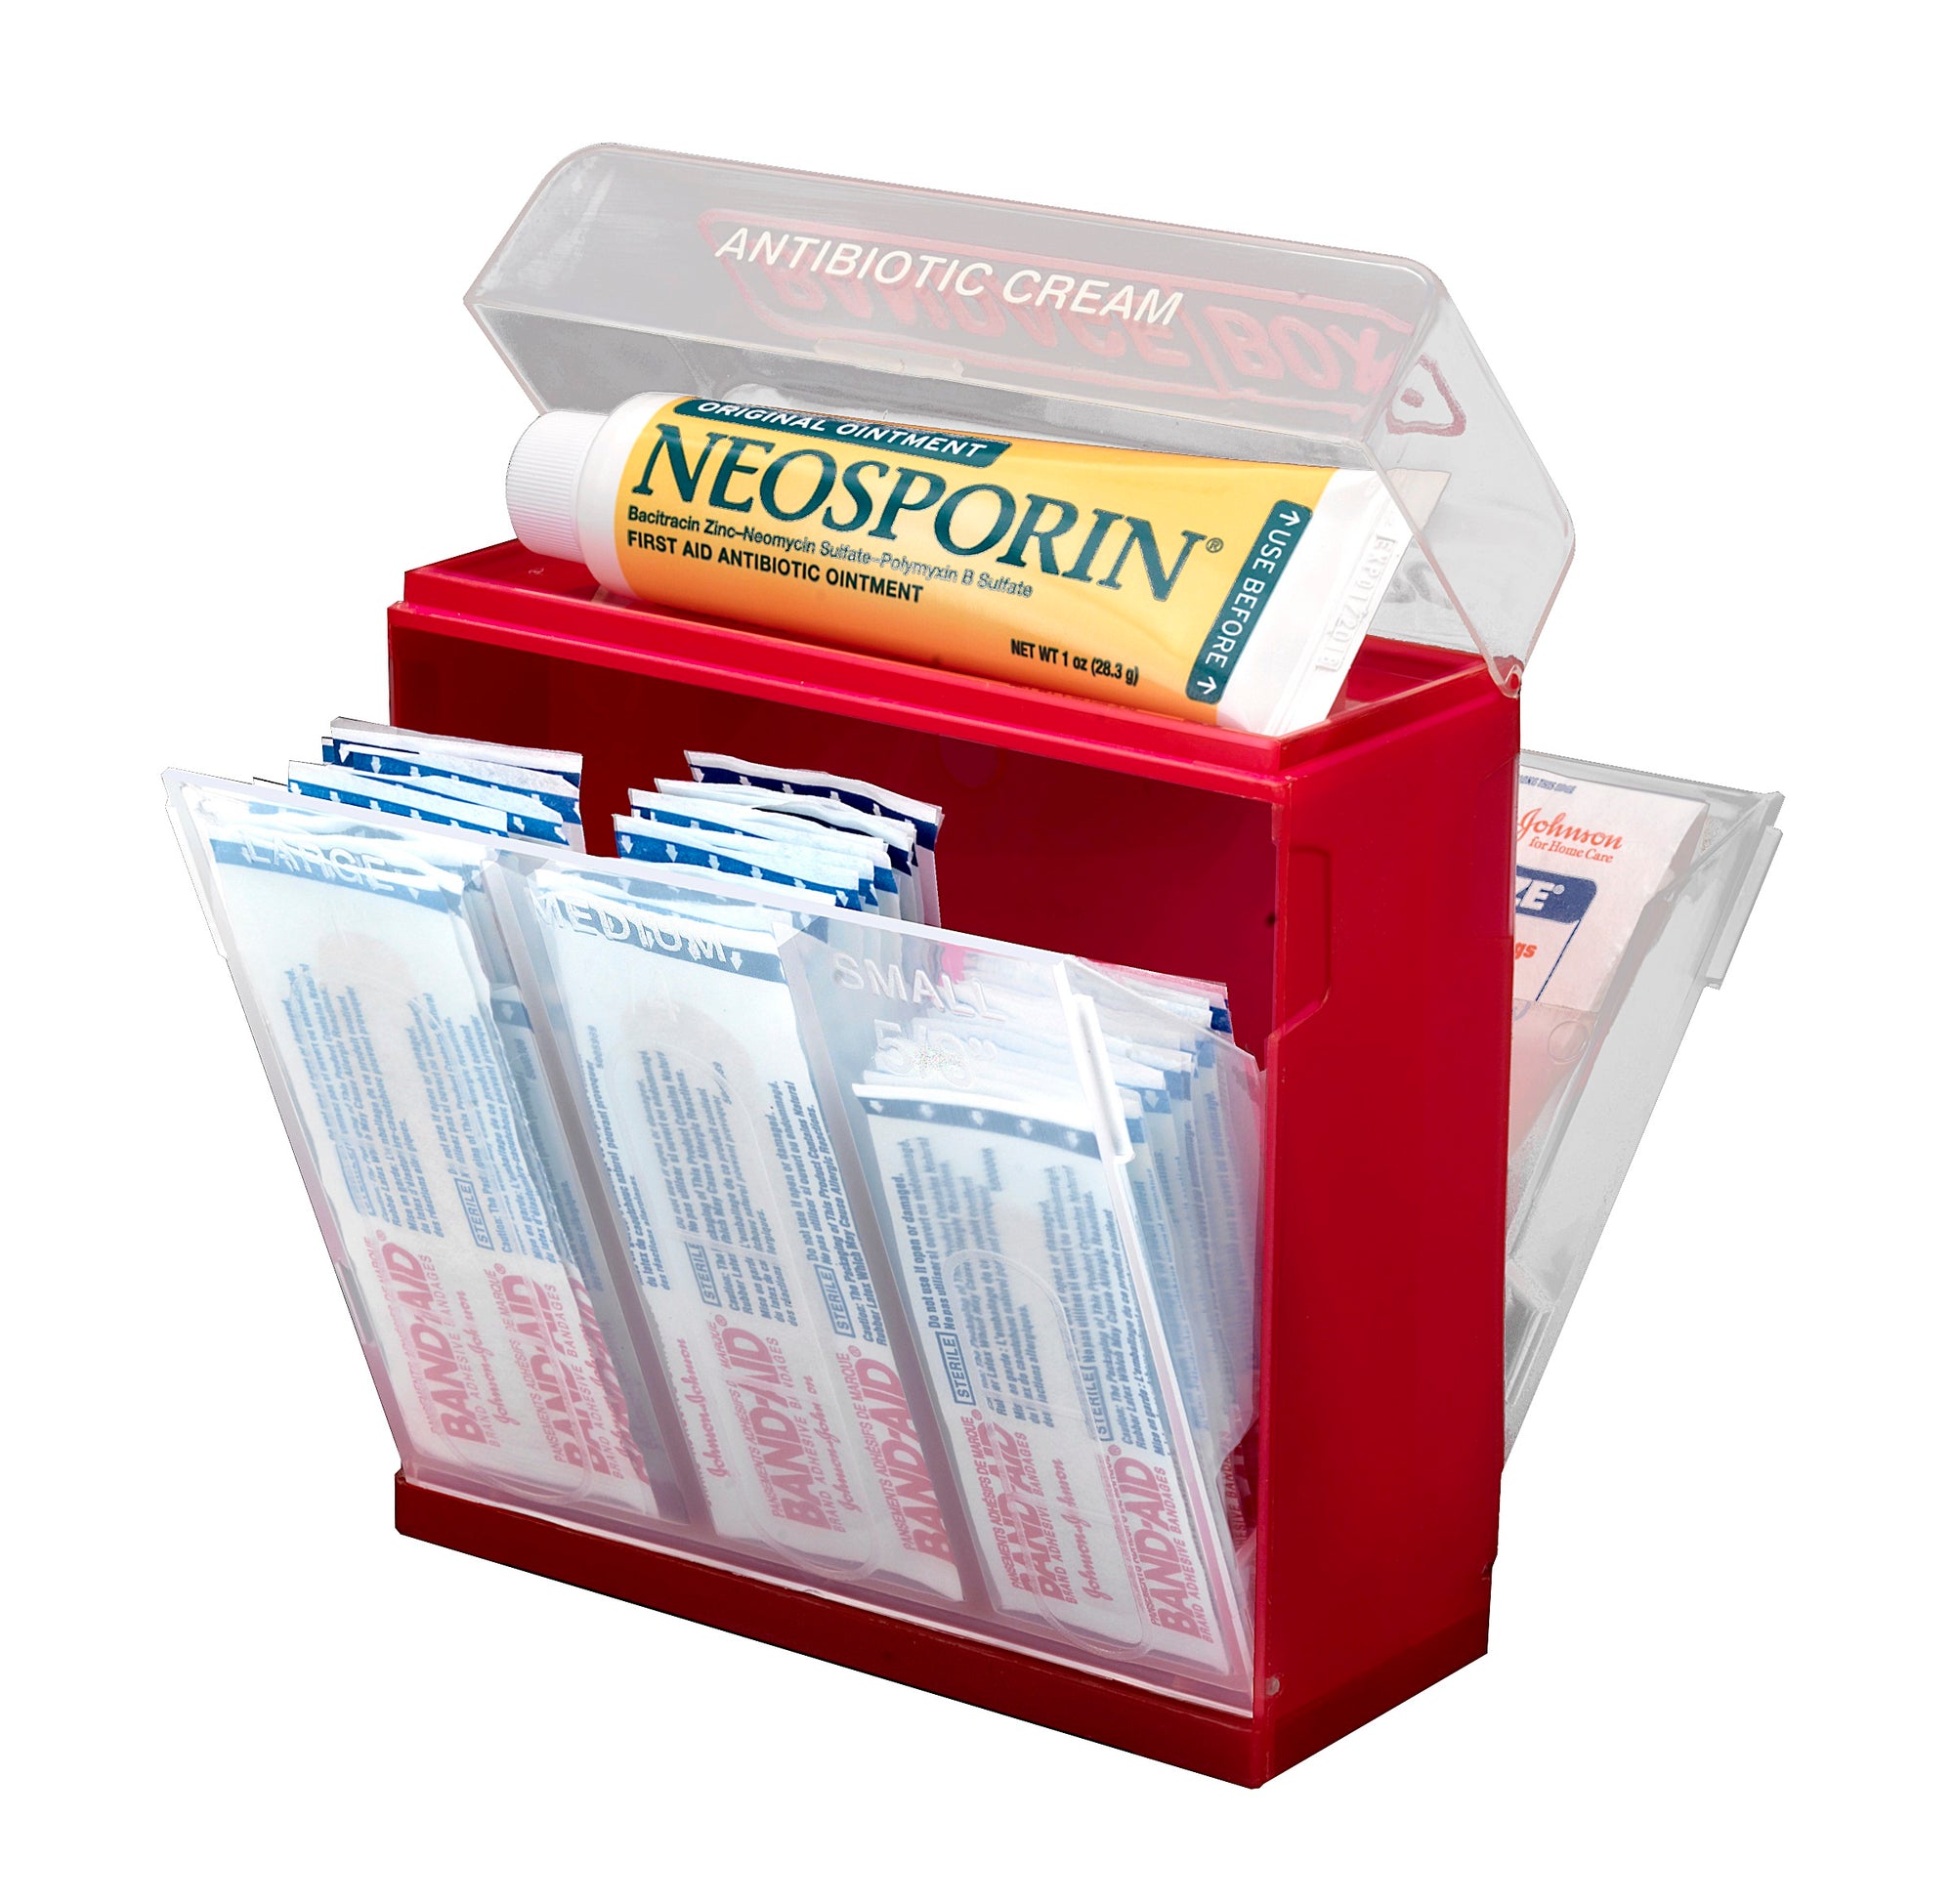 Bandaid Storage With Lid Ointment Storage Bandaids Box Band-aid Jar 2 Slots  Travel Containers Travel Cases Bathroom Storage Vanity Container -   Canada